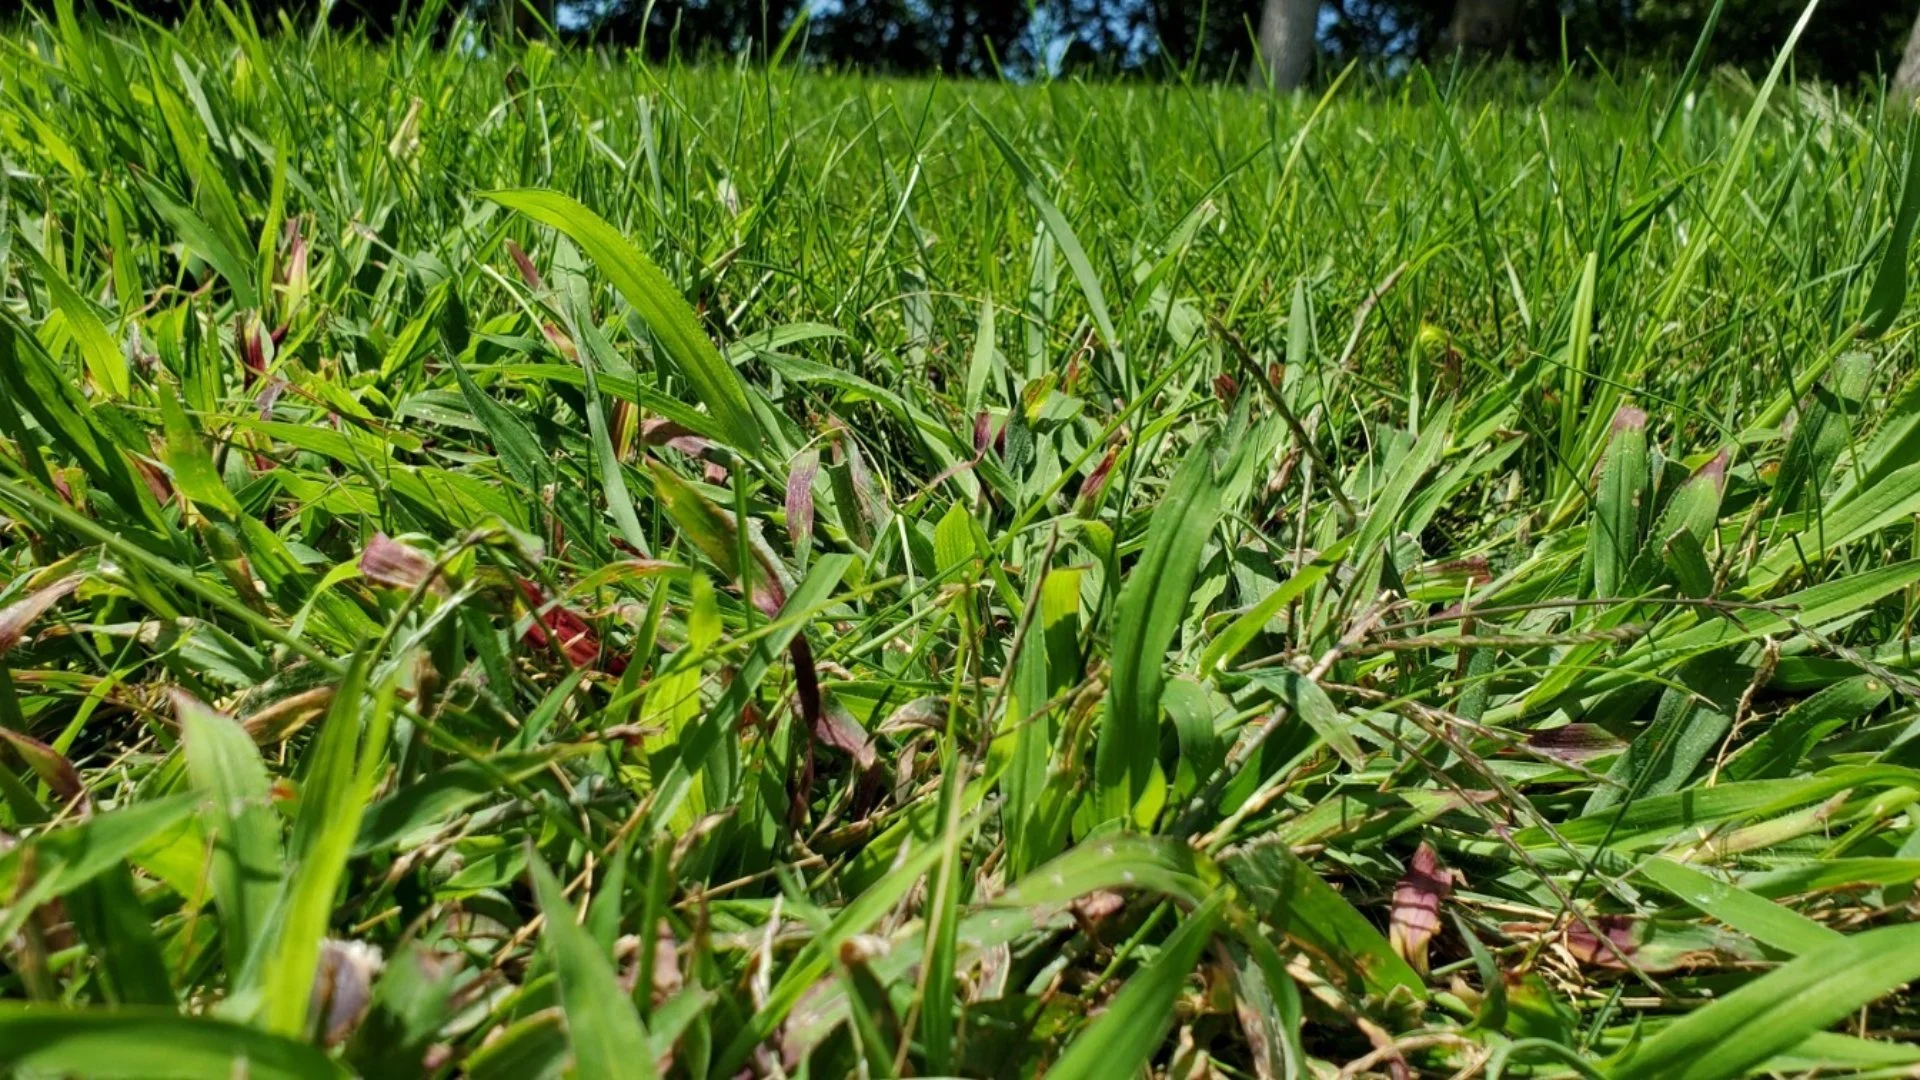 Crabgrass, Quackgrass, or Regular Grass? Here’s How To Tell What’s on Your Lawn